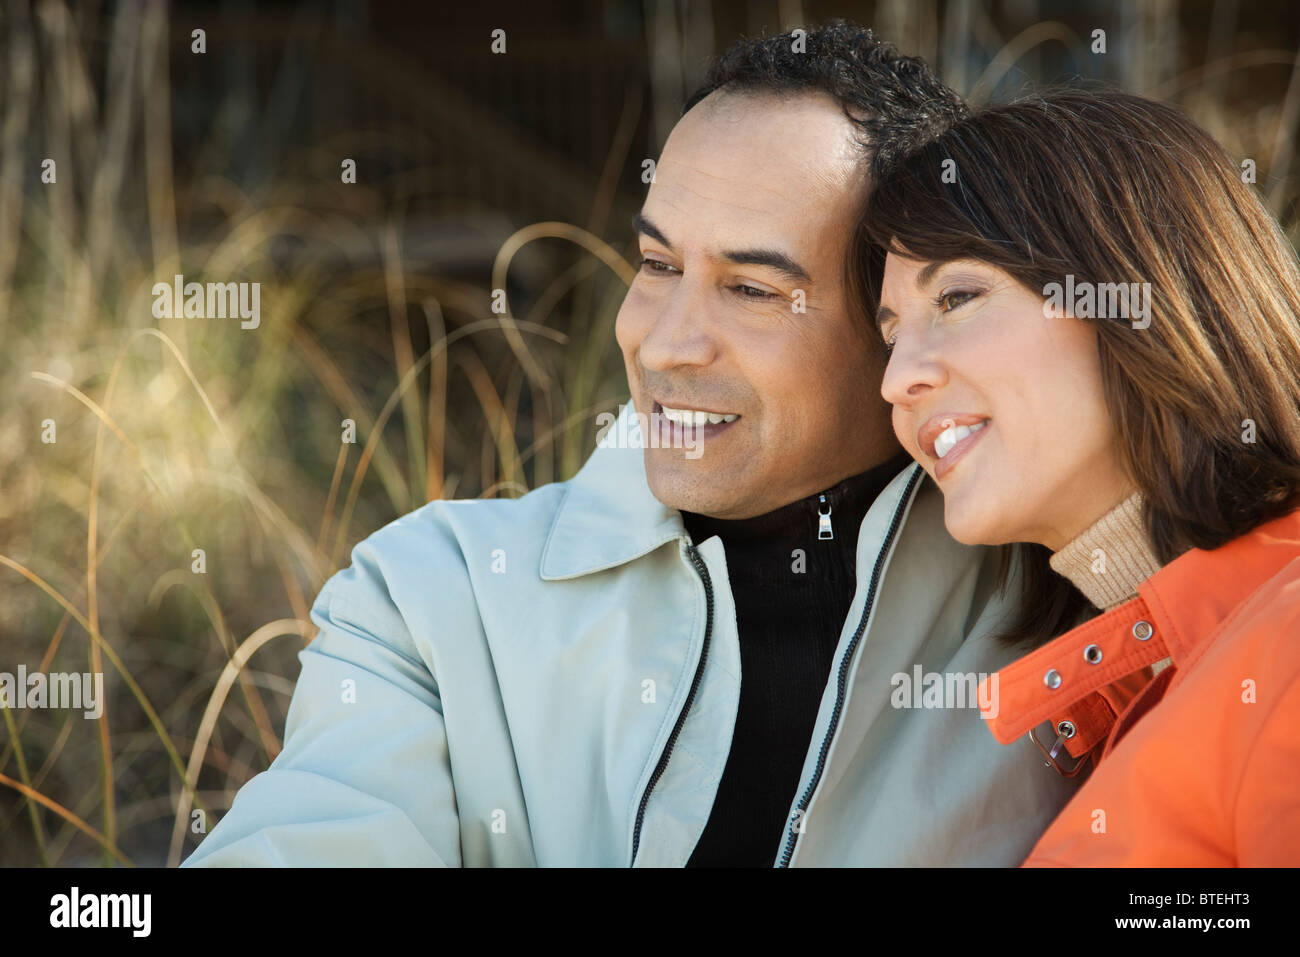 Young couple relaxing together outdoors, portrait Banque D'Images